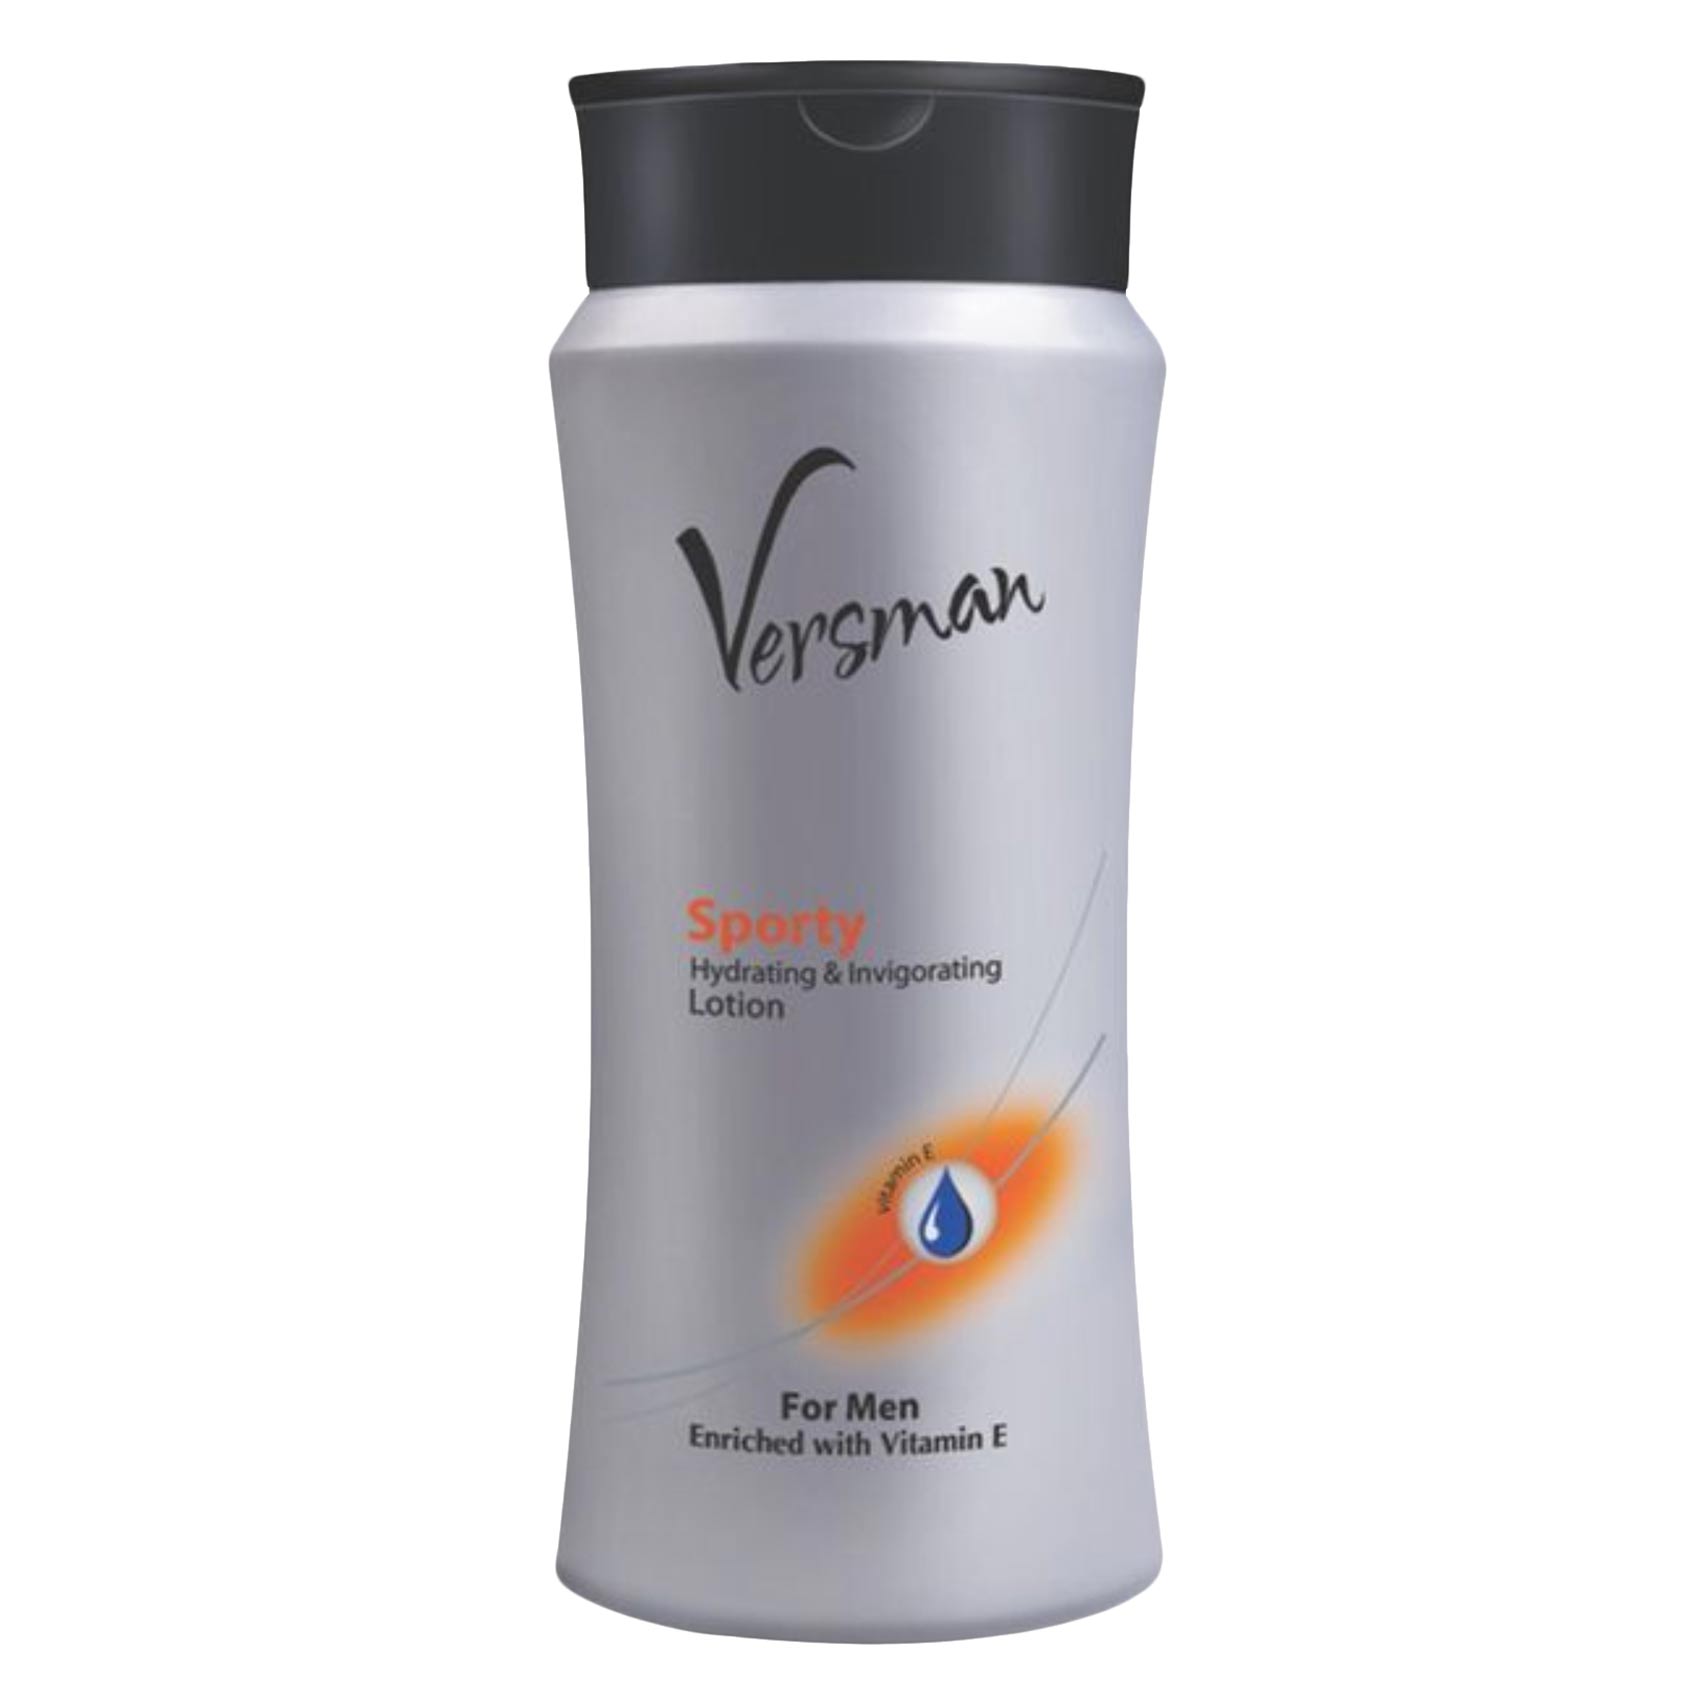 Versman Sporty Hydrating And Invigorating Body Lotion For Men 200ml